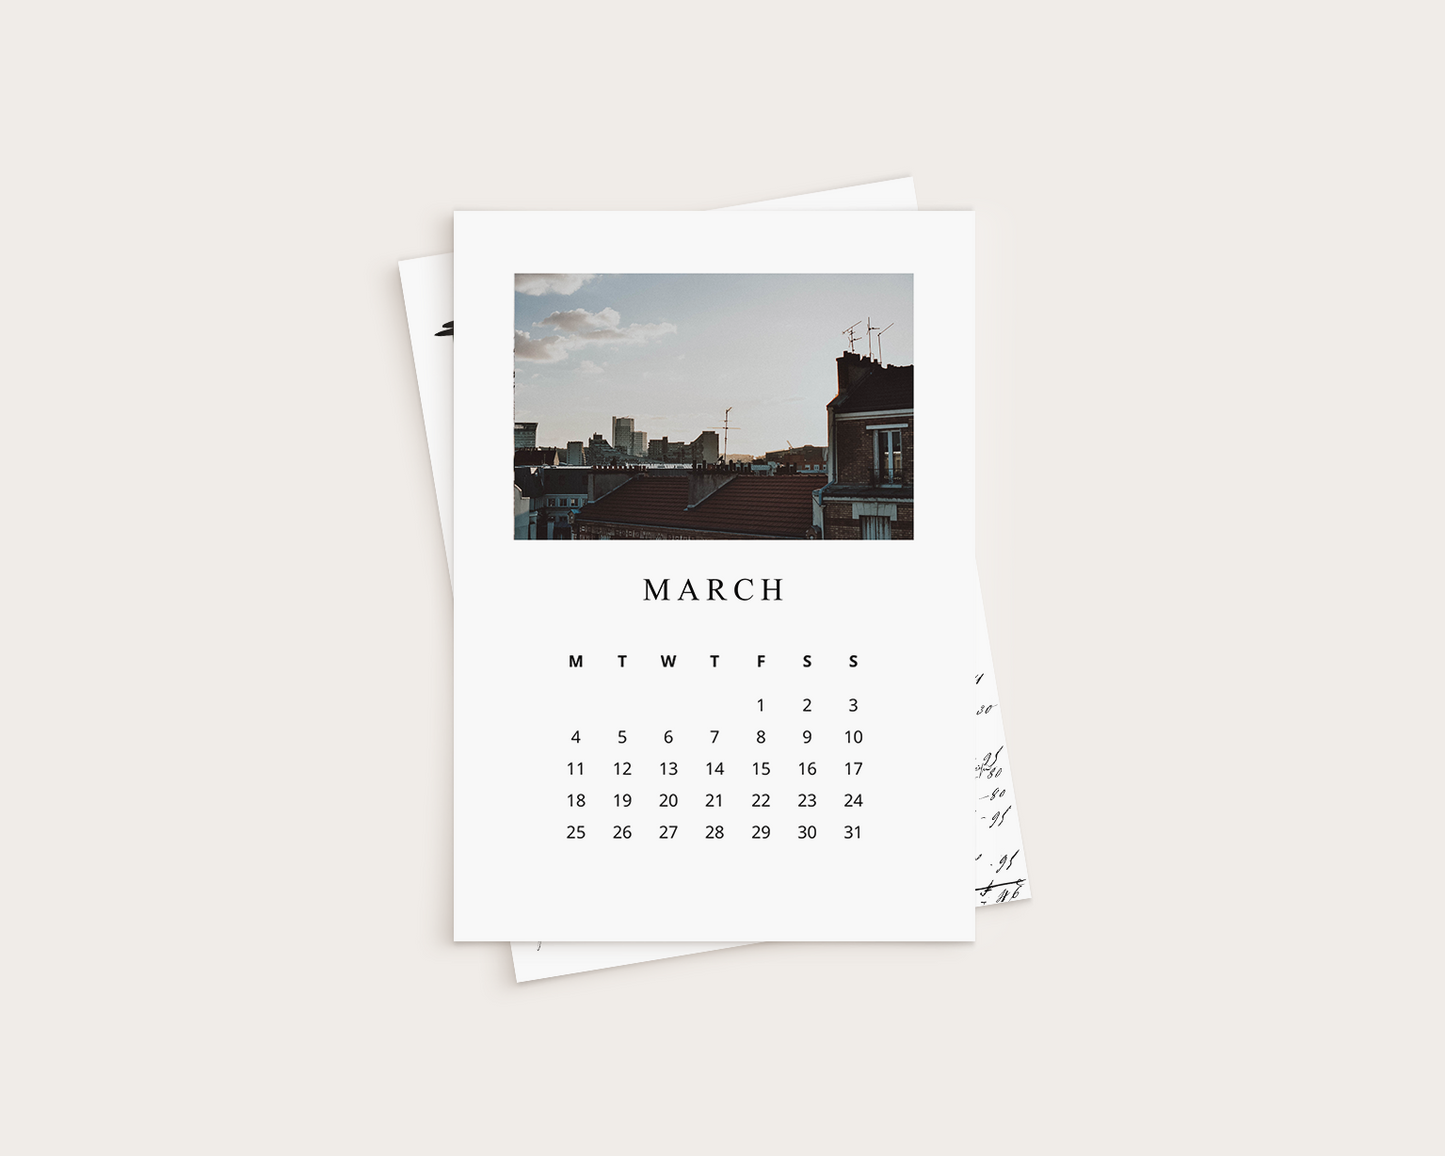 Calendar - Analog pictures - March